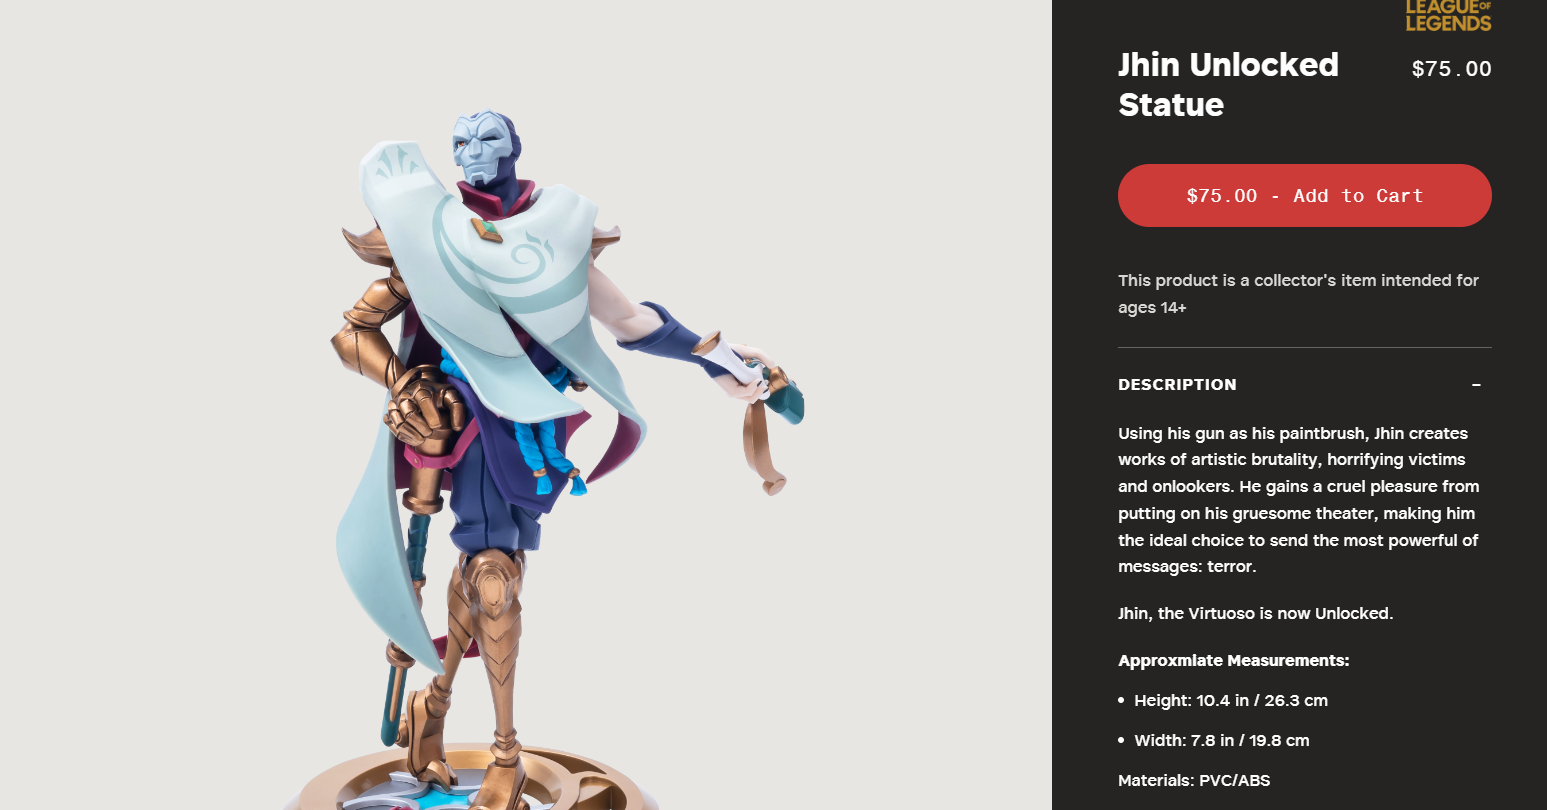 Jhin statue from Riot Games merch store